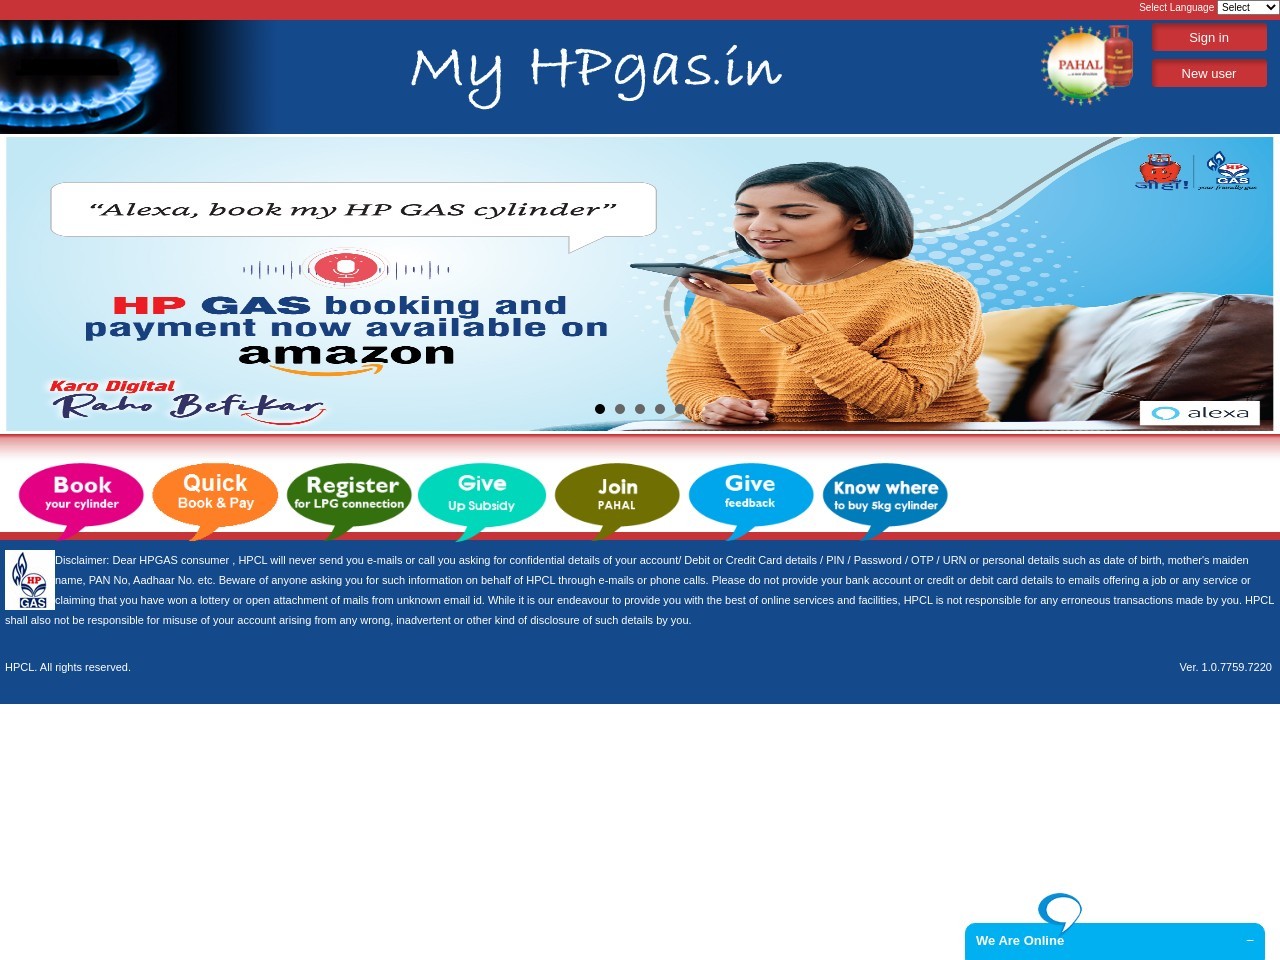 LPG Services - My HPGas